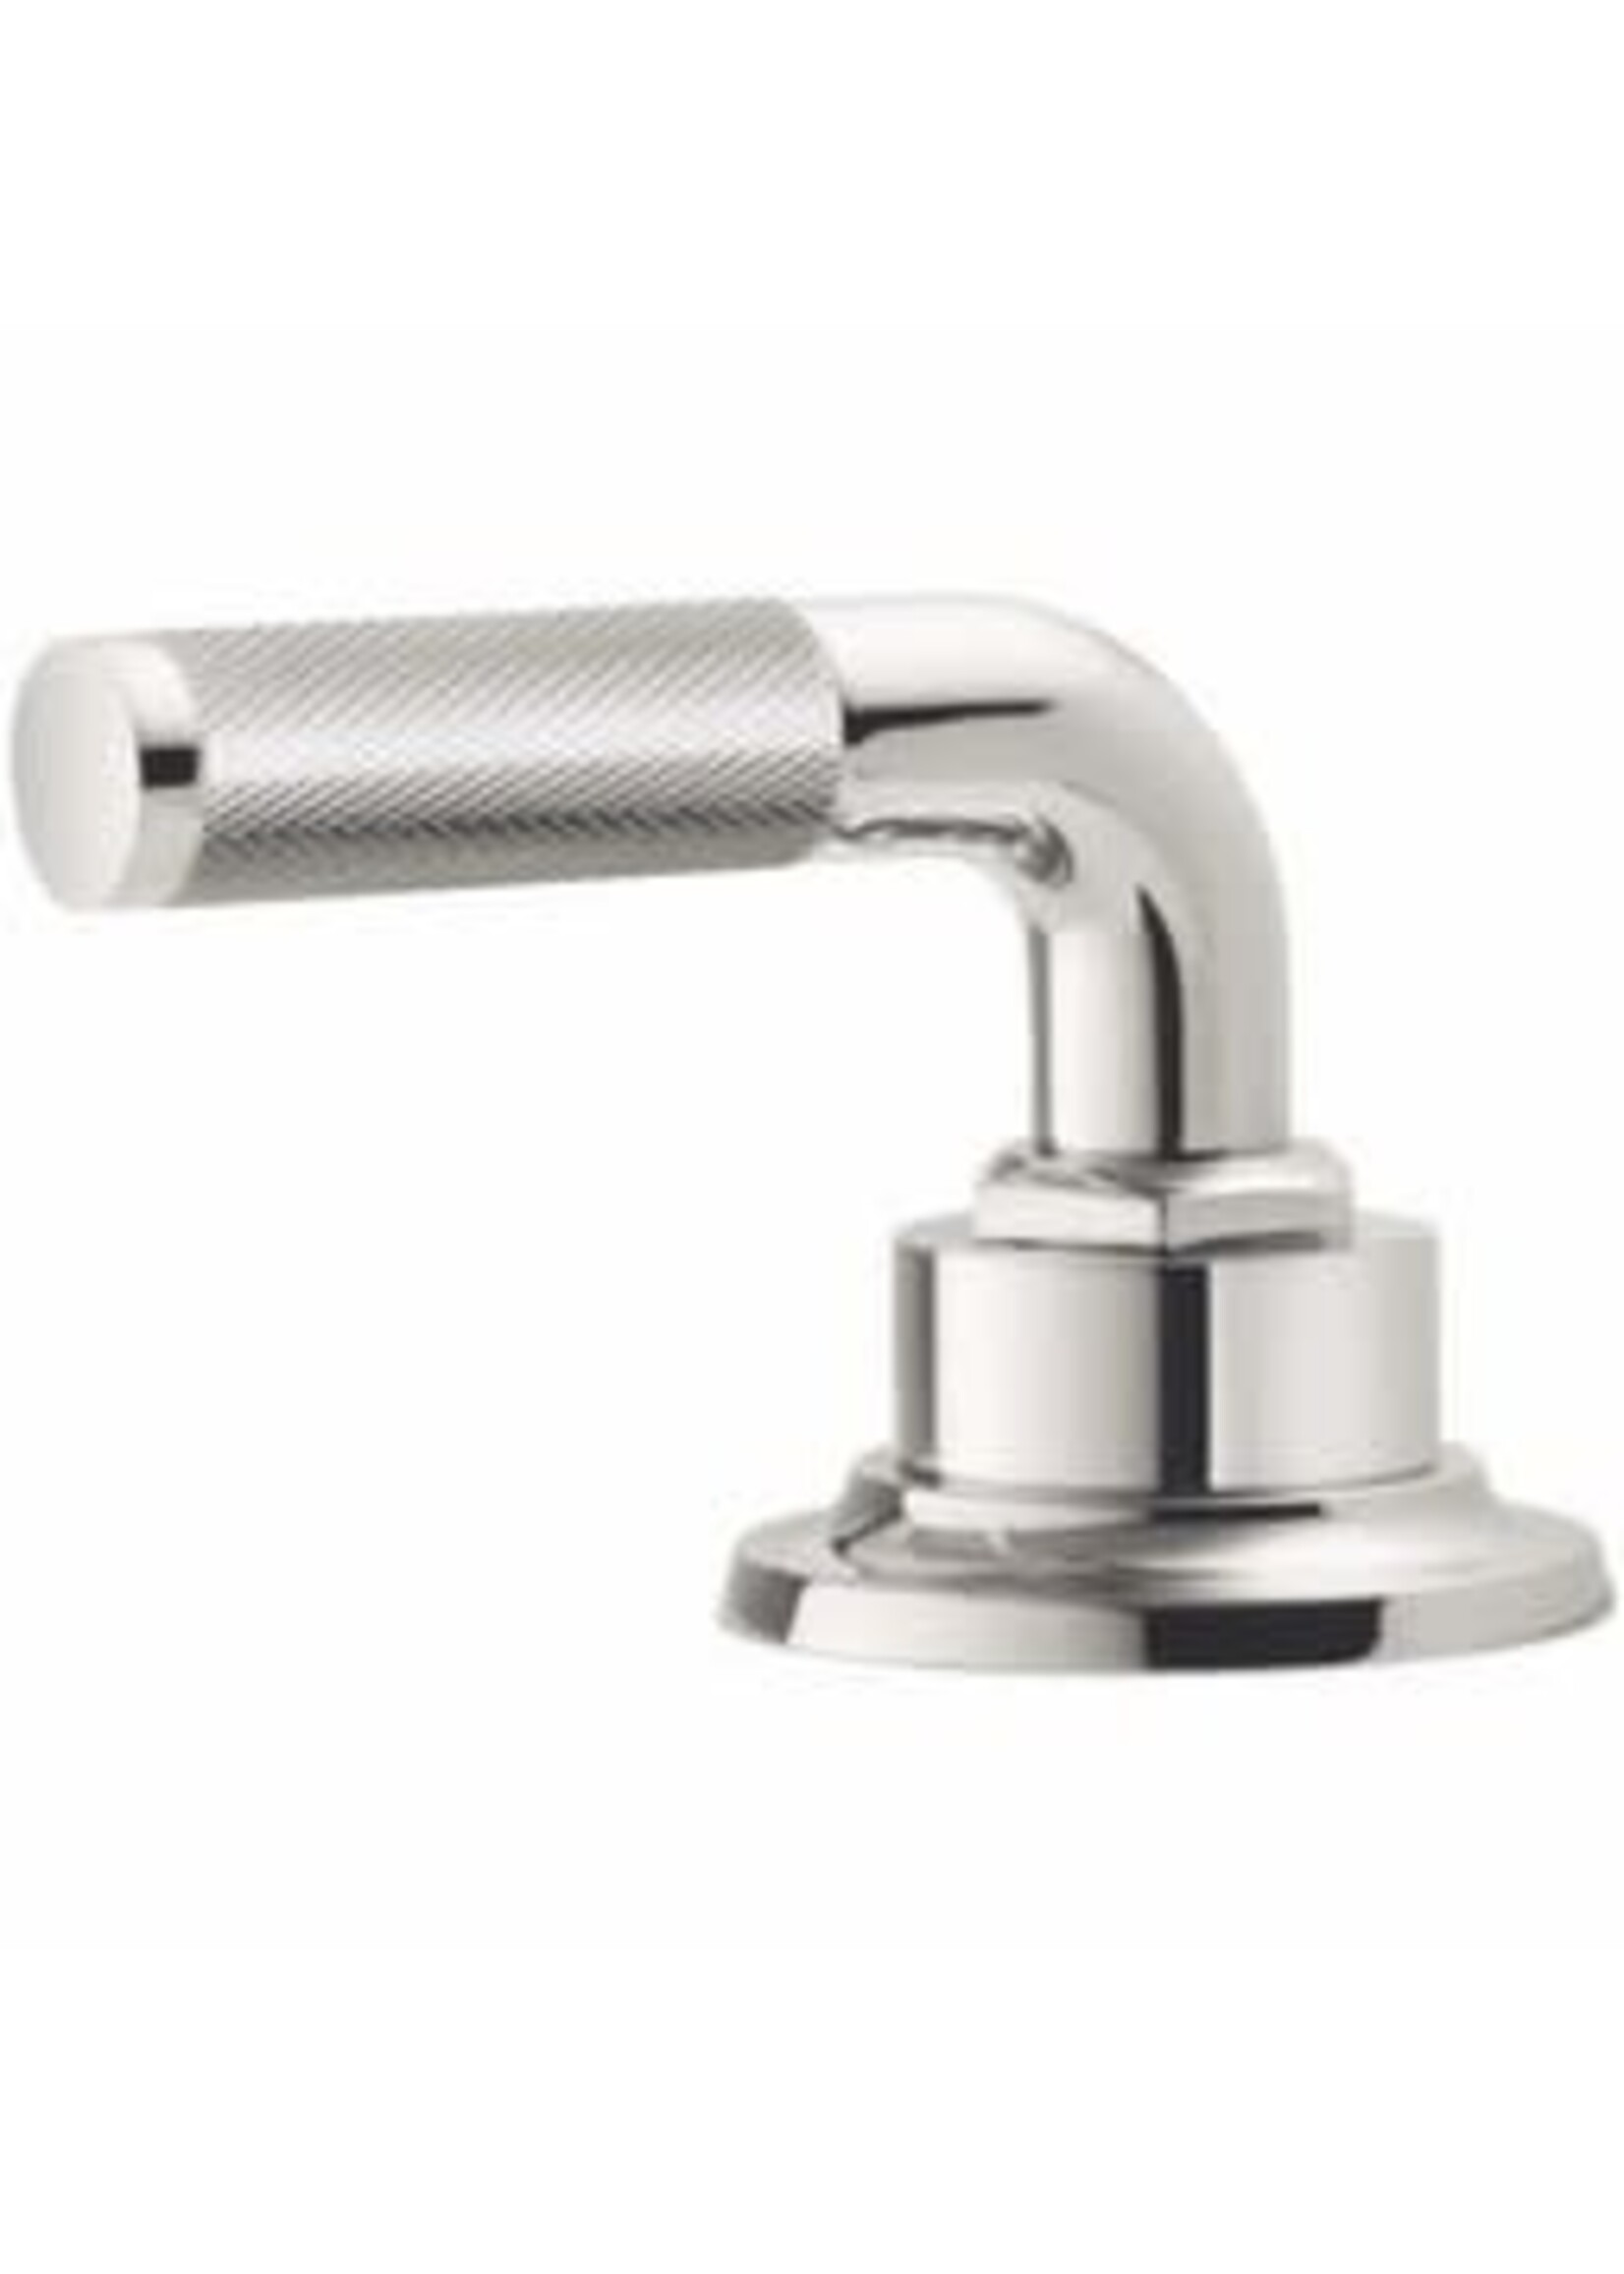 California Faucets California Faucets Davoli pull down kitchen faucet 18" High Arc Spout w/ Squeeze sprayer Custom hdl